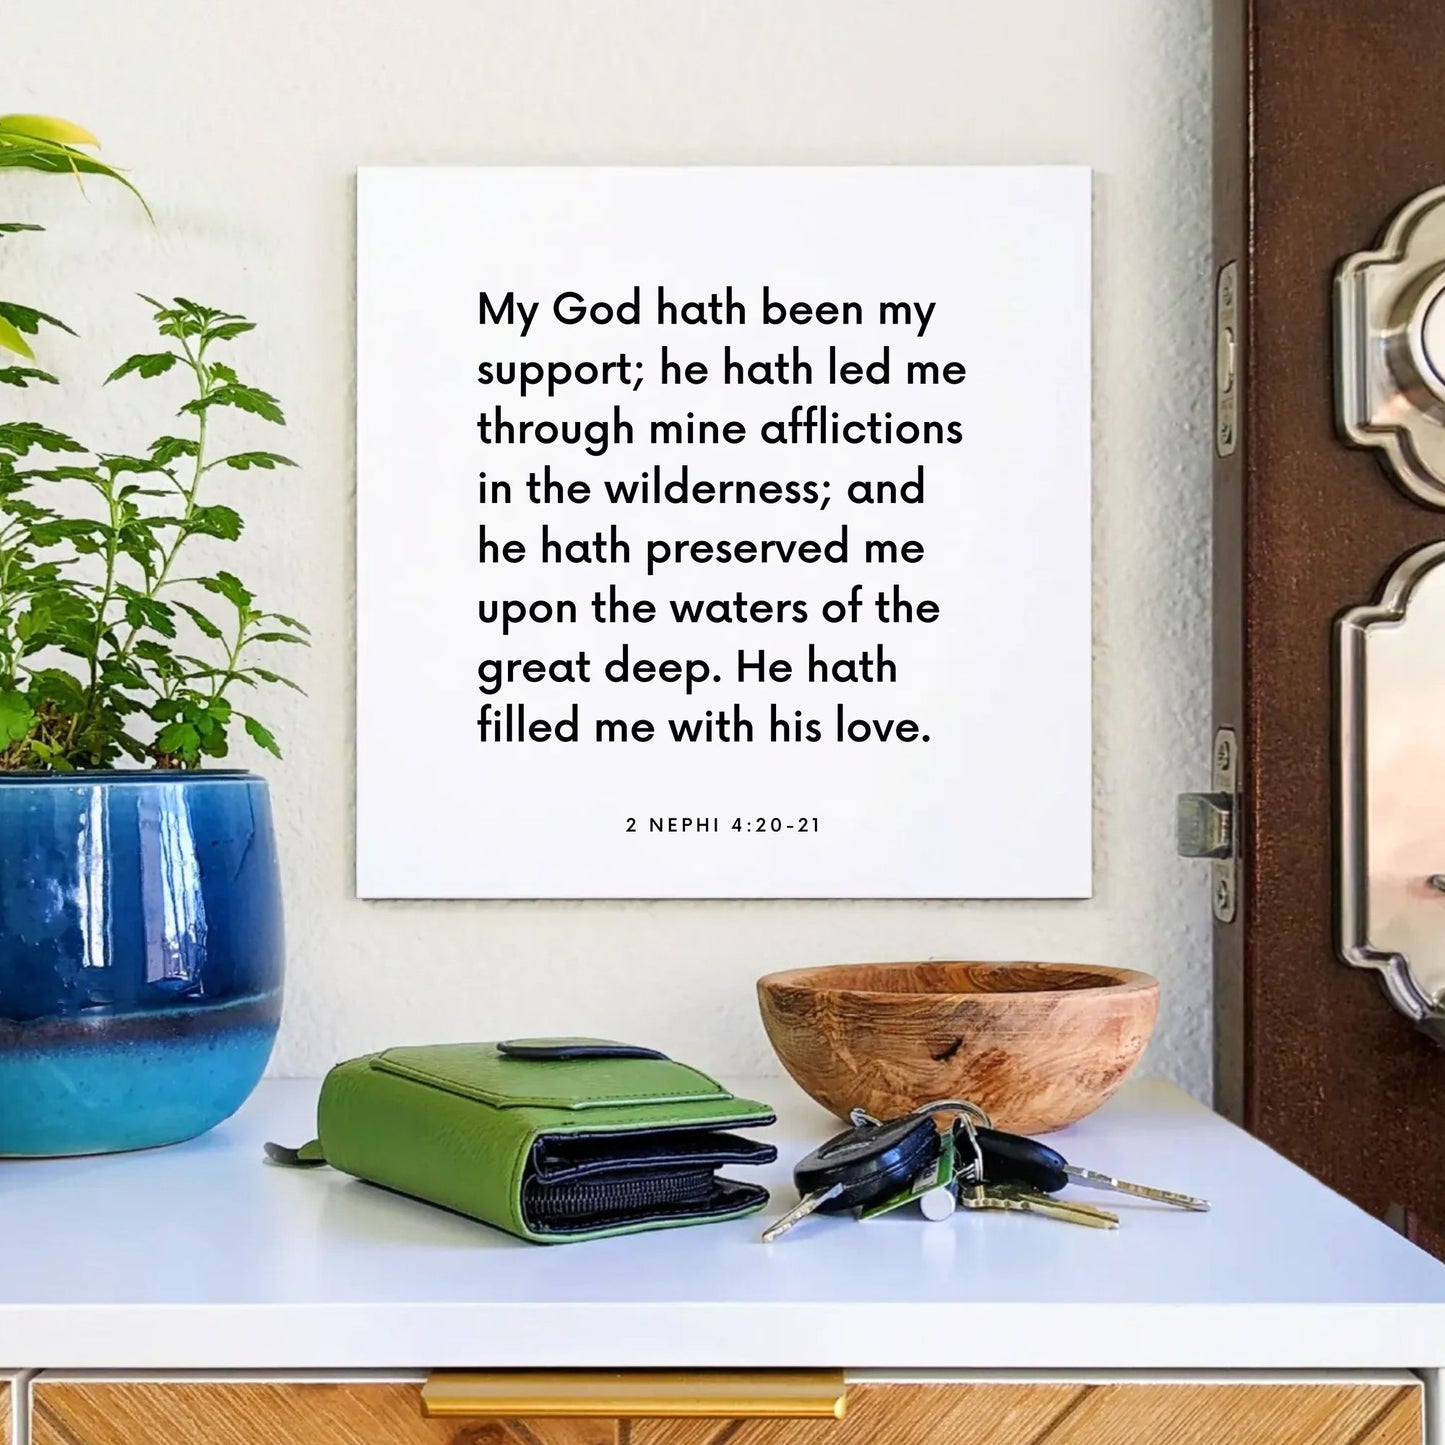 Entryway mouting of the scripture tile for 2 Nephi 4:20-21 - "My God hath been my support"